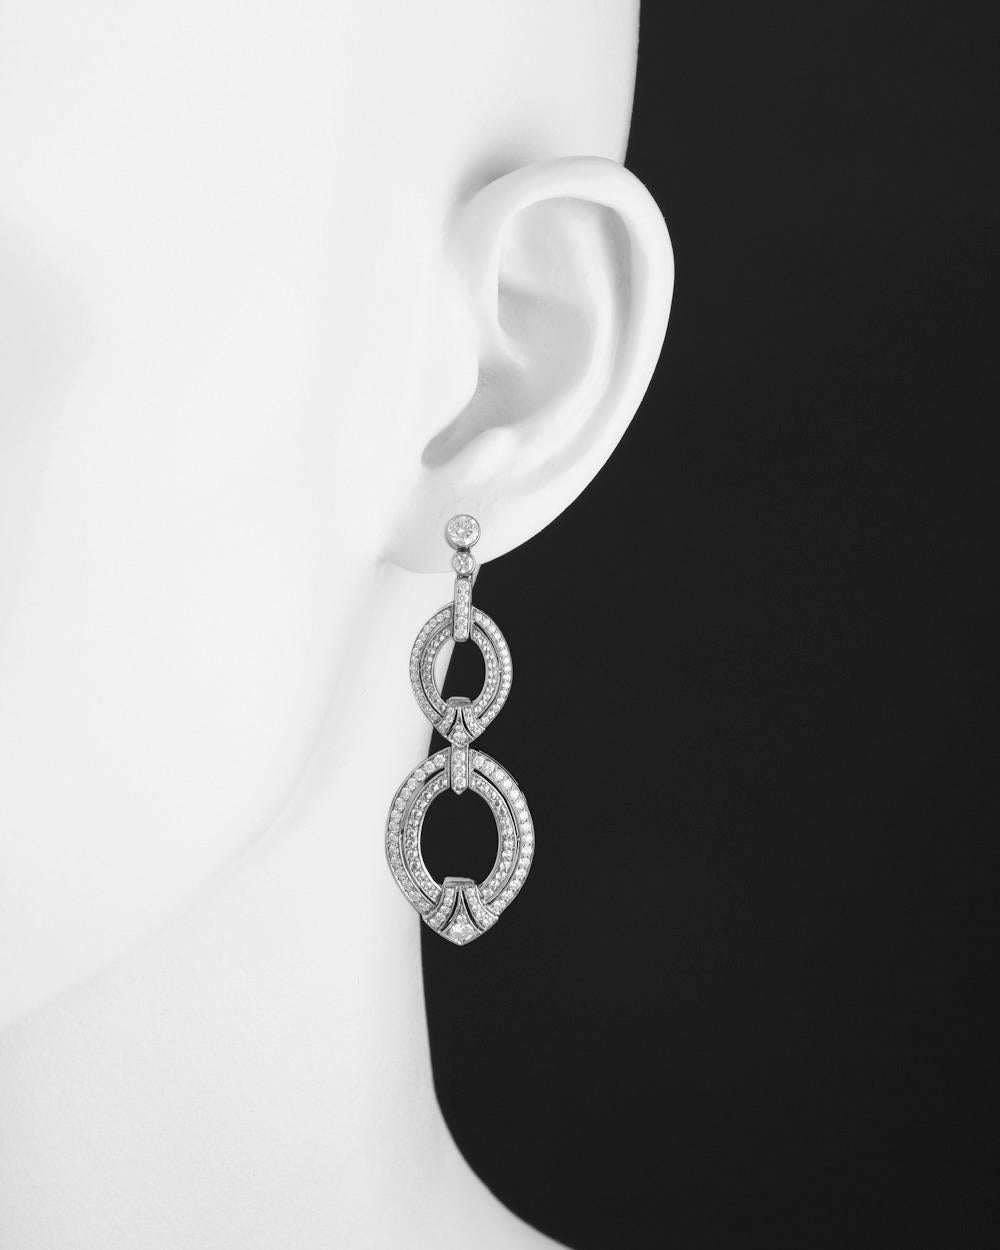 Drop earrings, featuring articulated oval-shaped links set with a double row of round diamonds, in 18k white gold. Diamonds weighing 2.00 total carats. 2.15